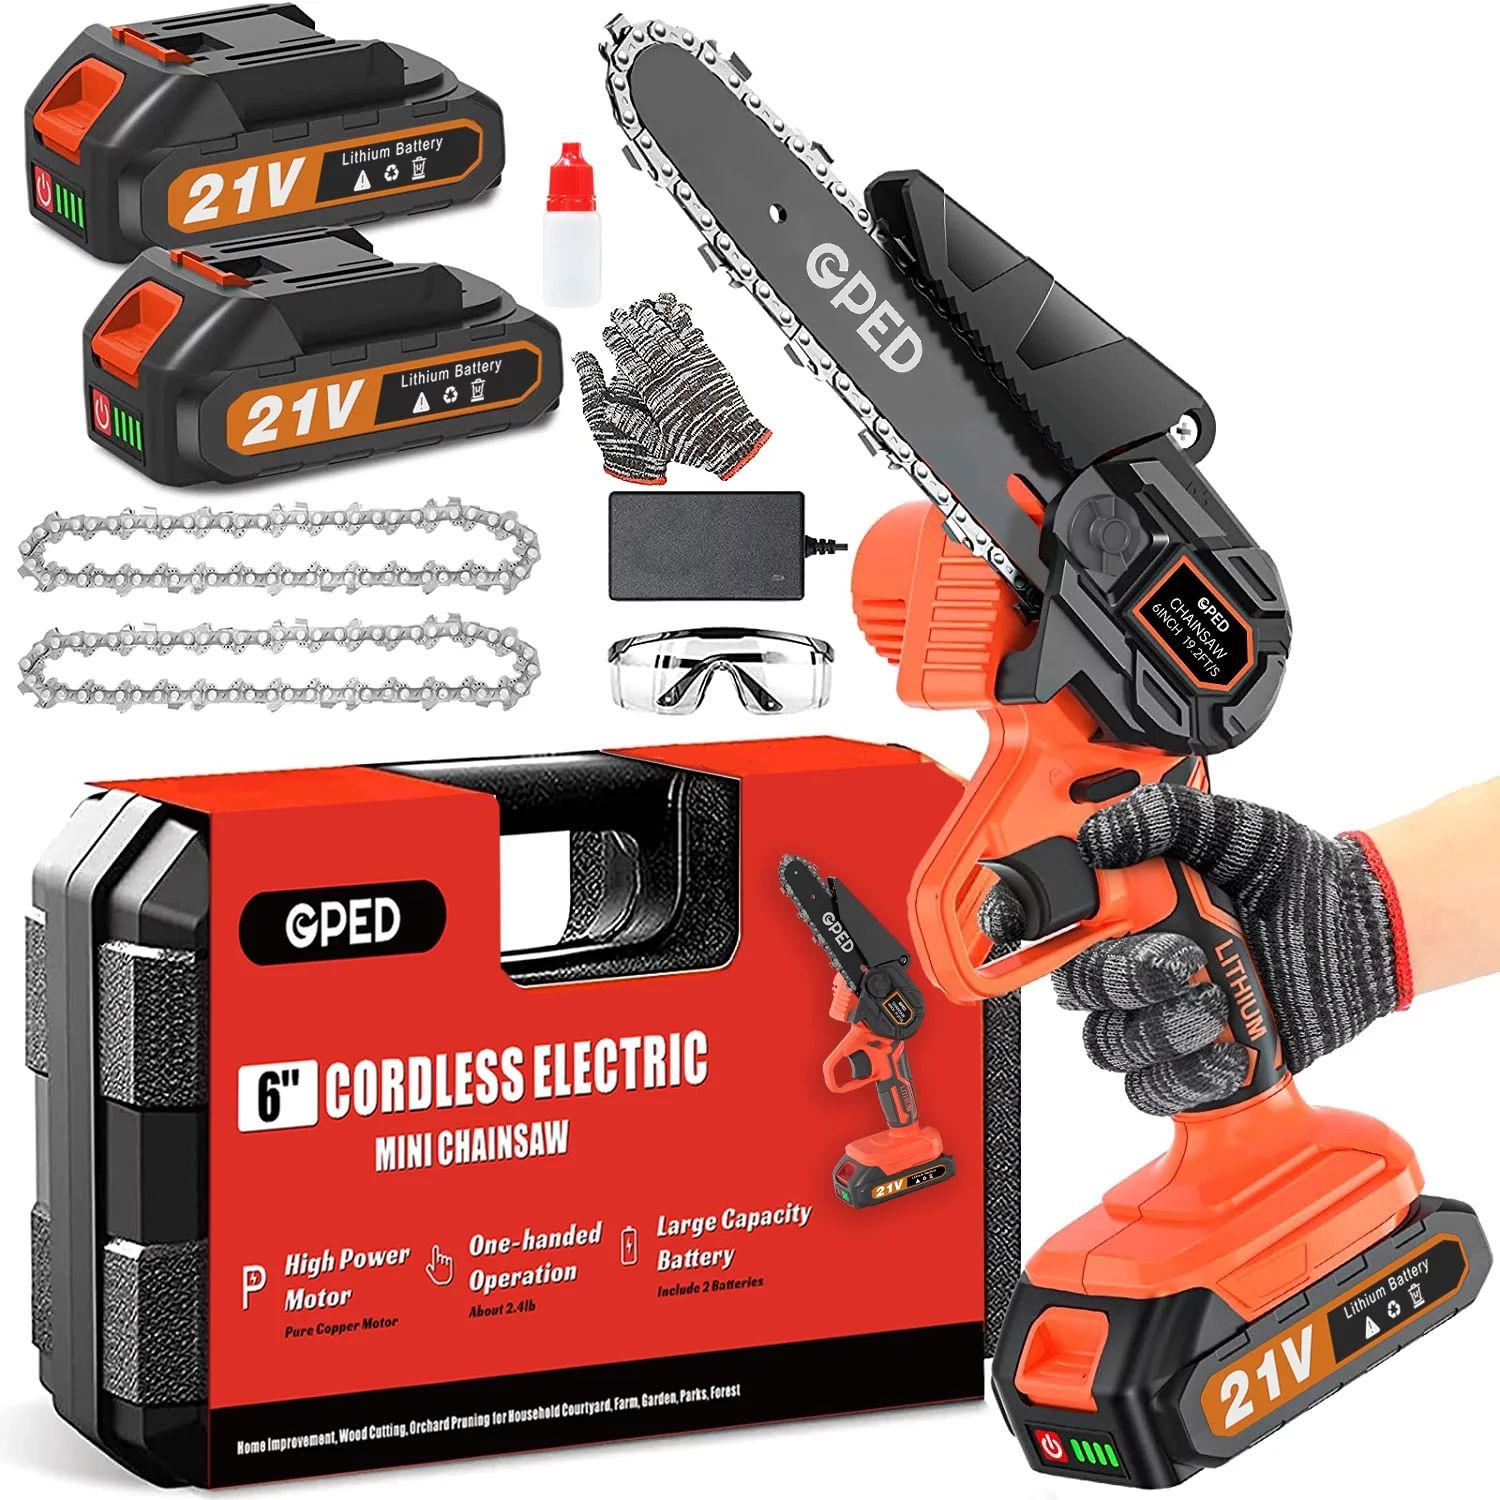 Mini Chainsaw Cordless 6 inch with 2 Battery, Mini Power Chain Saw with Security Lock, Electric C... | Walmart (US)